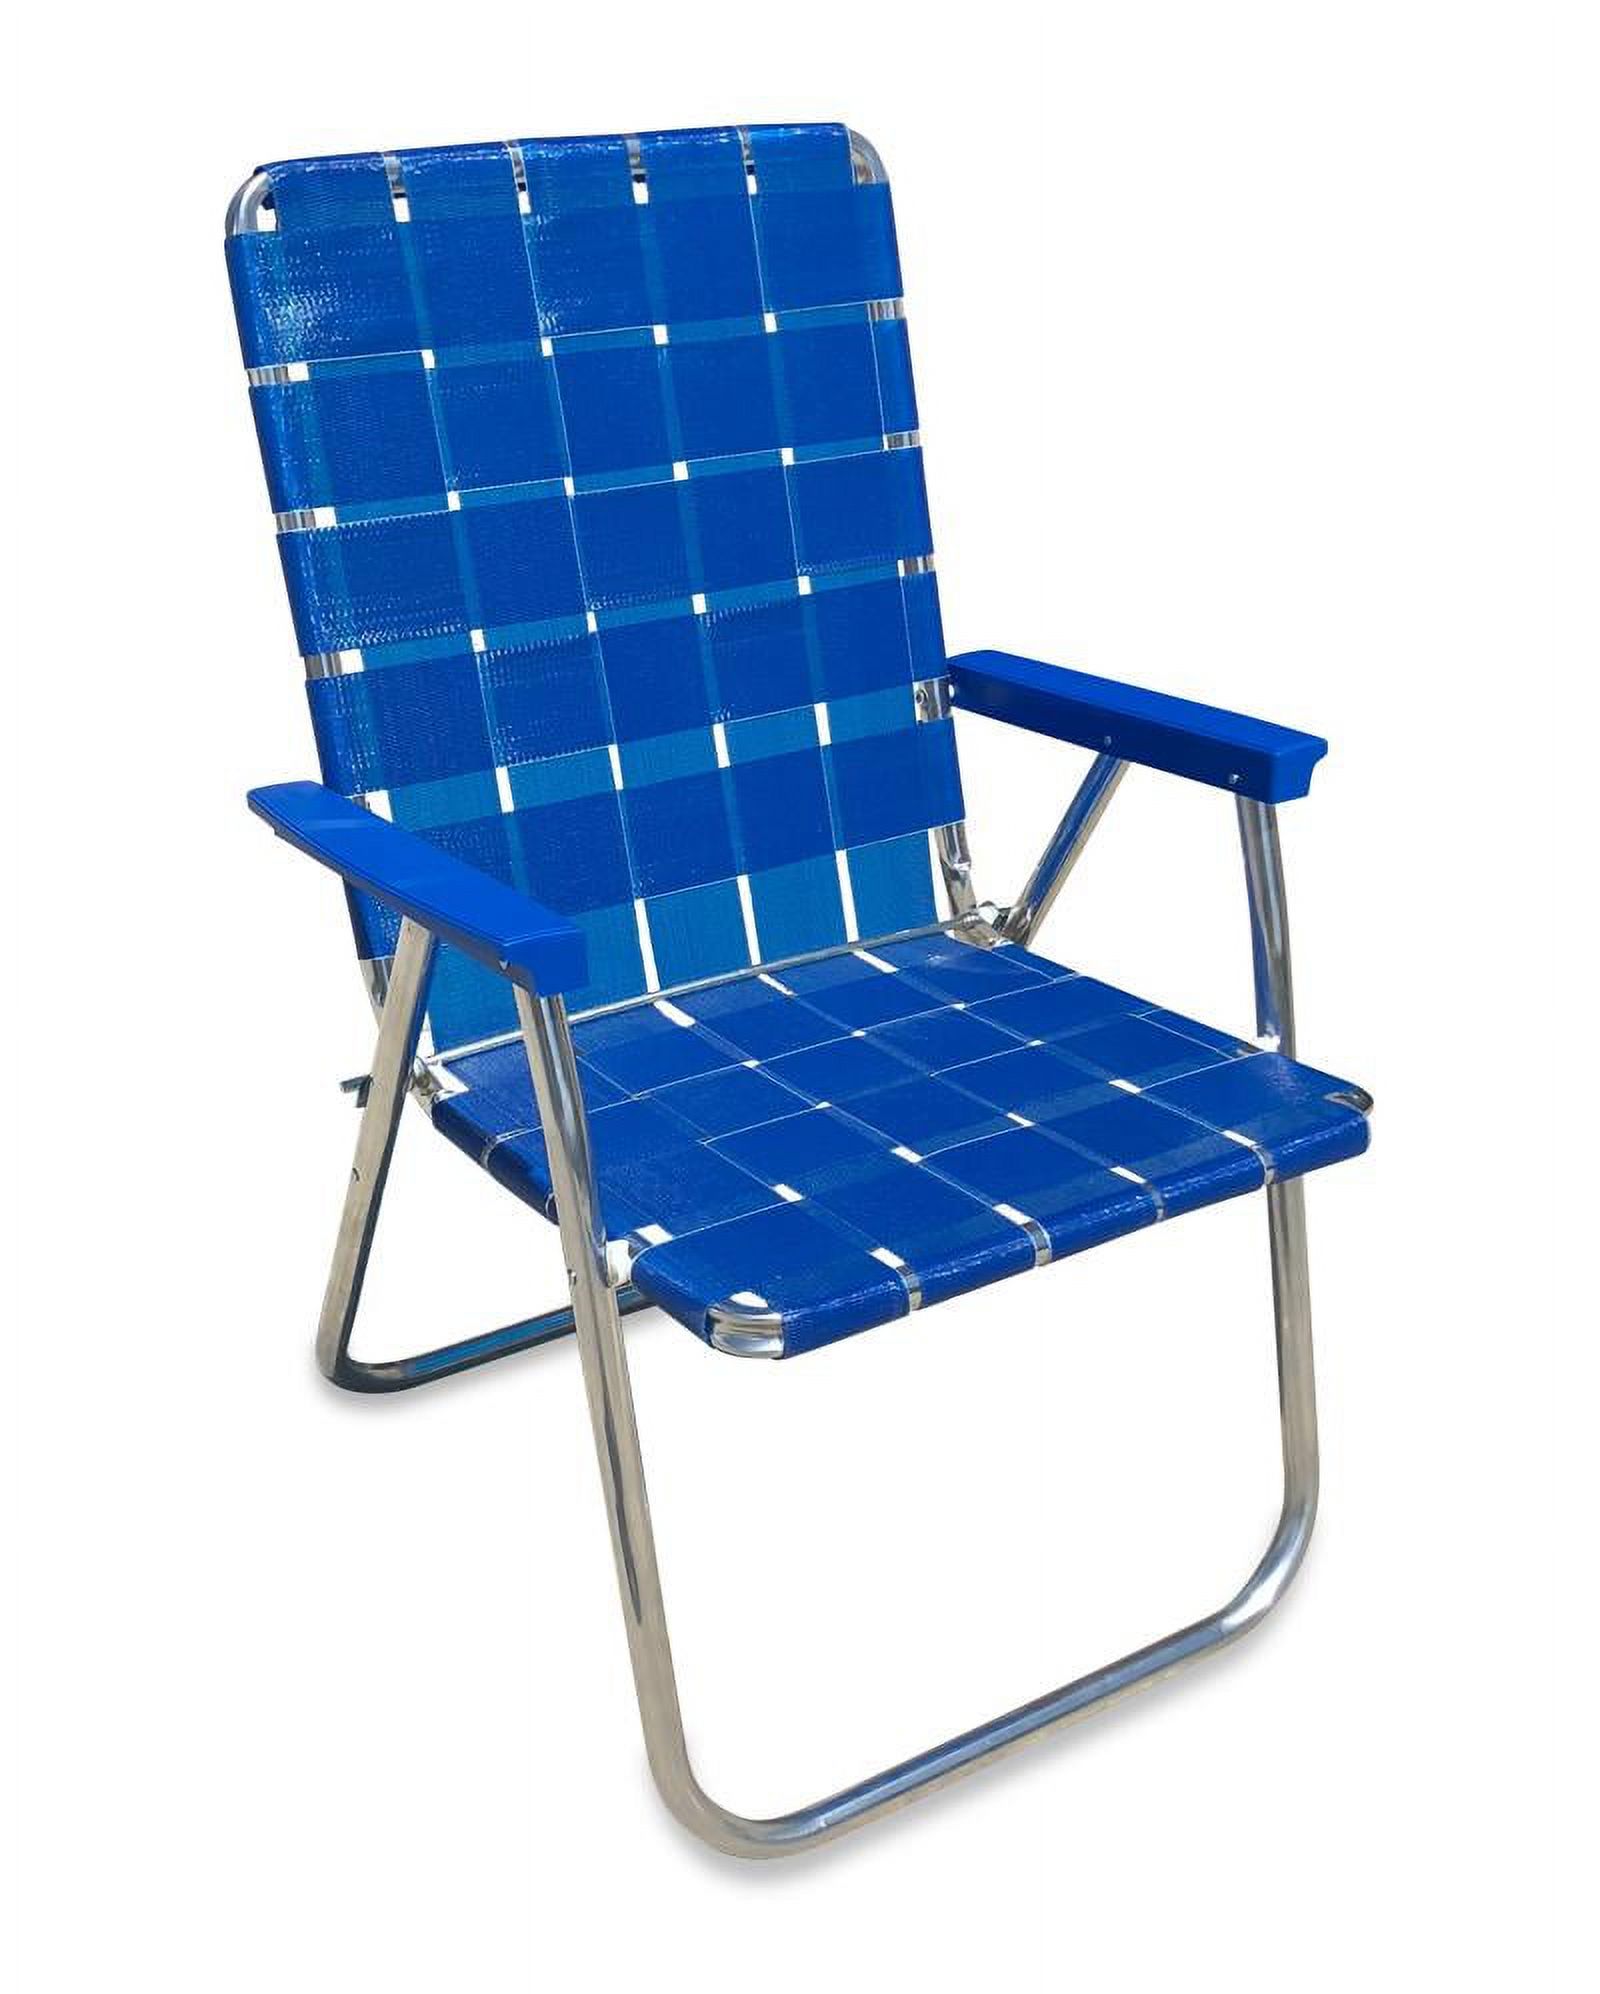 Lawn Chair USA - Classic Folding Aluminum Webbed Chair - Durable, Portable, and Comfortable Outdoor Chair - Ideal for Camping, Sports, and Concerts - Blue Wave with Blue arms - image 1 of 7